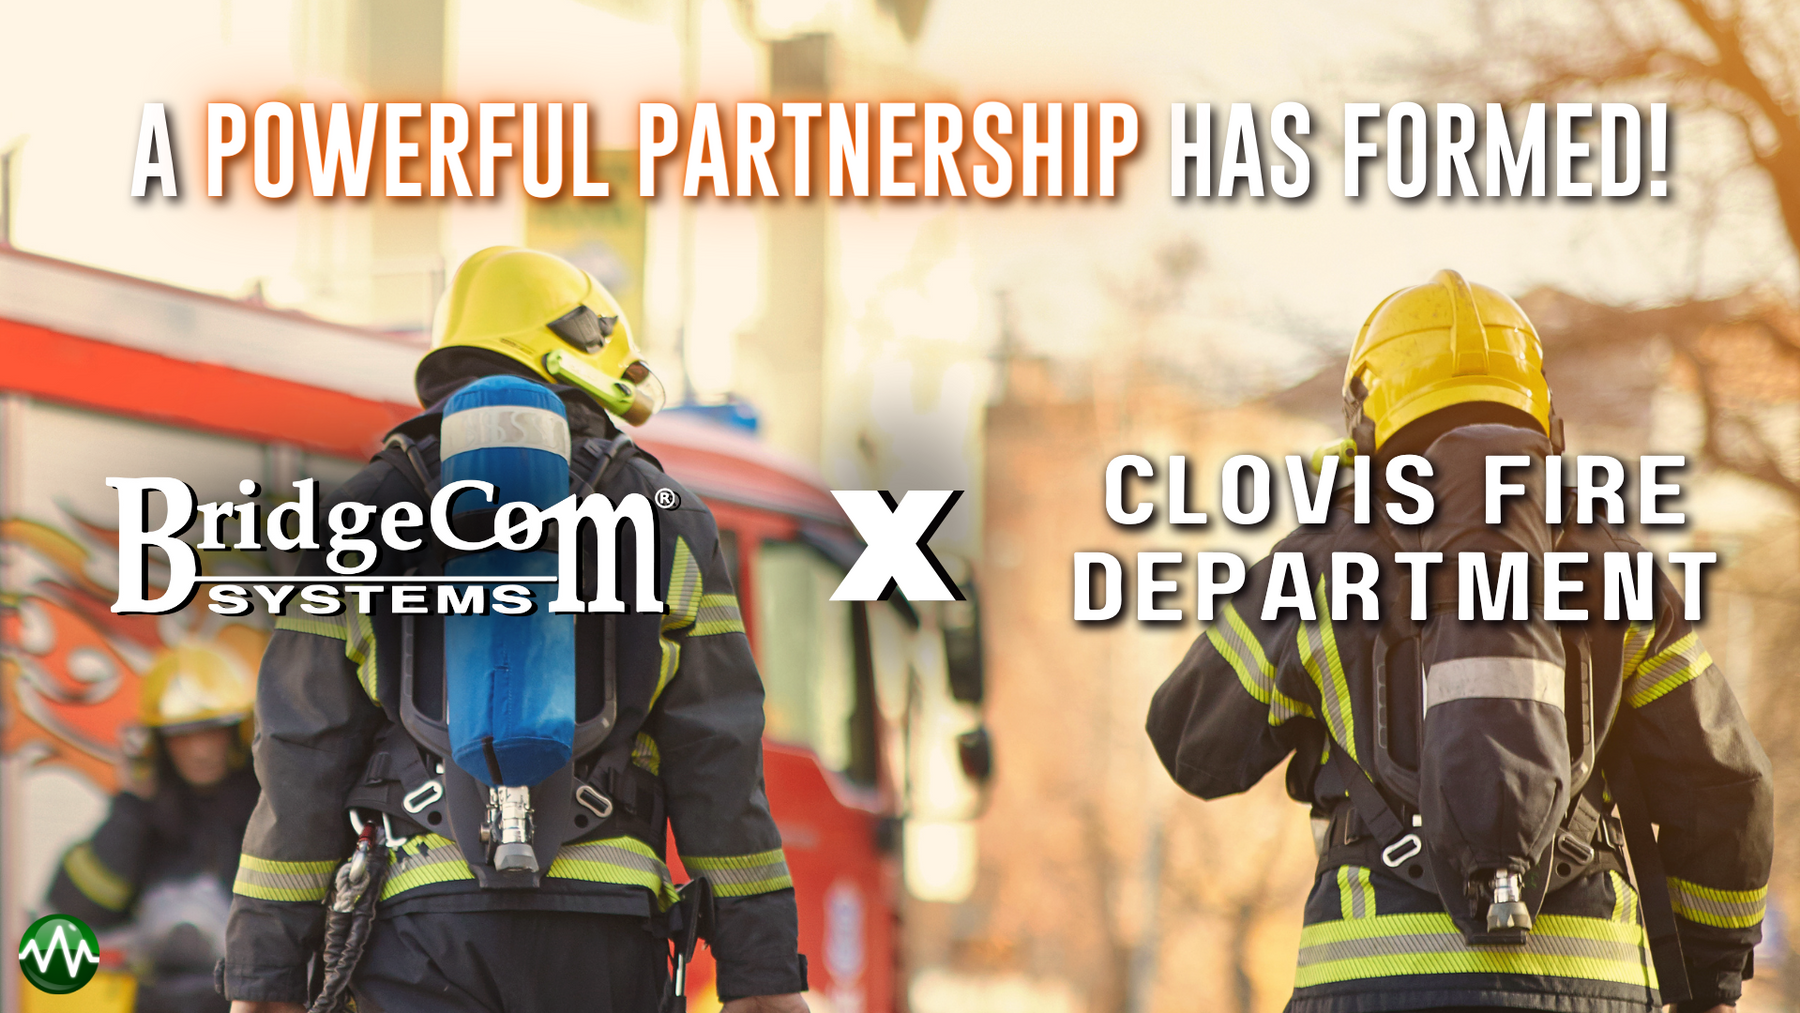 Breaking: BridgeCom Systems Partners with Clovis Fire Department to Provide Handheld Radios to Firefighters